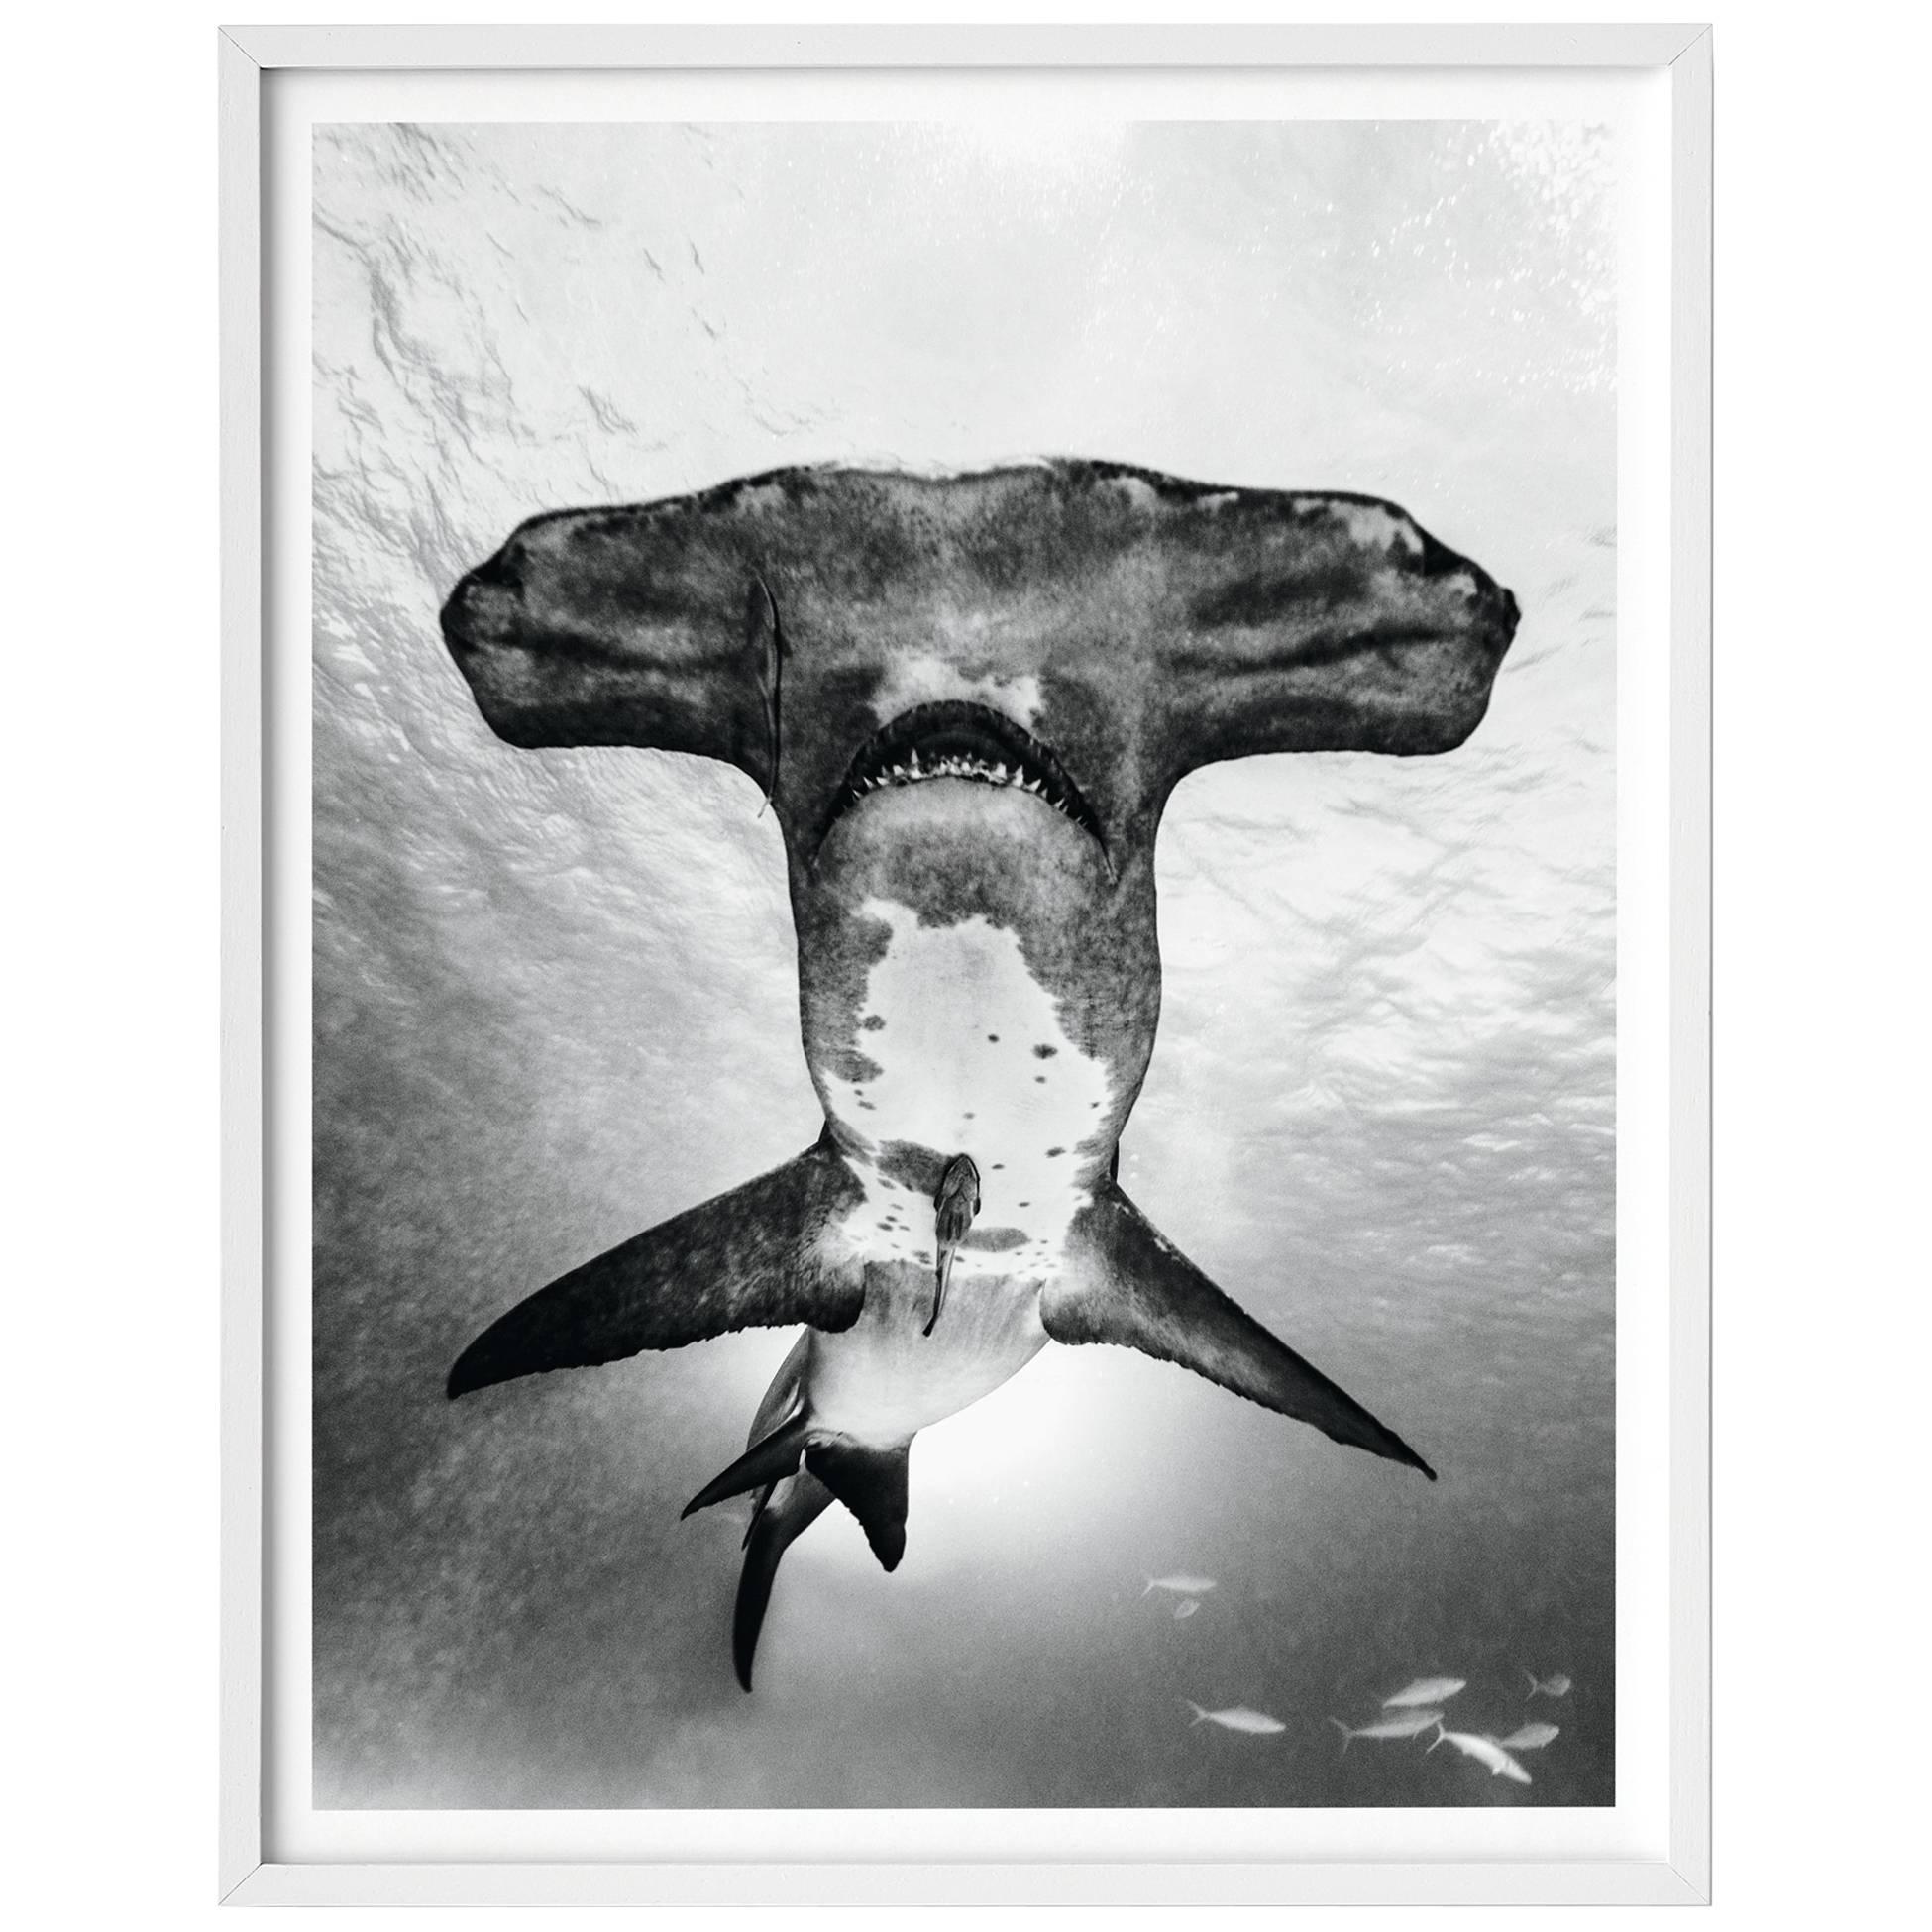 Michael Muller, Sharks, Art Edition No. 101-200 ‘Under Study’ For Sale